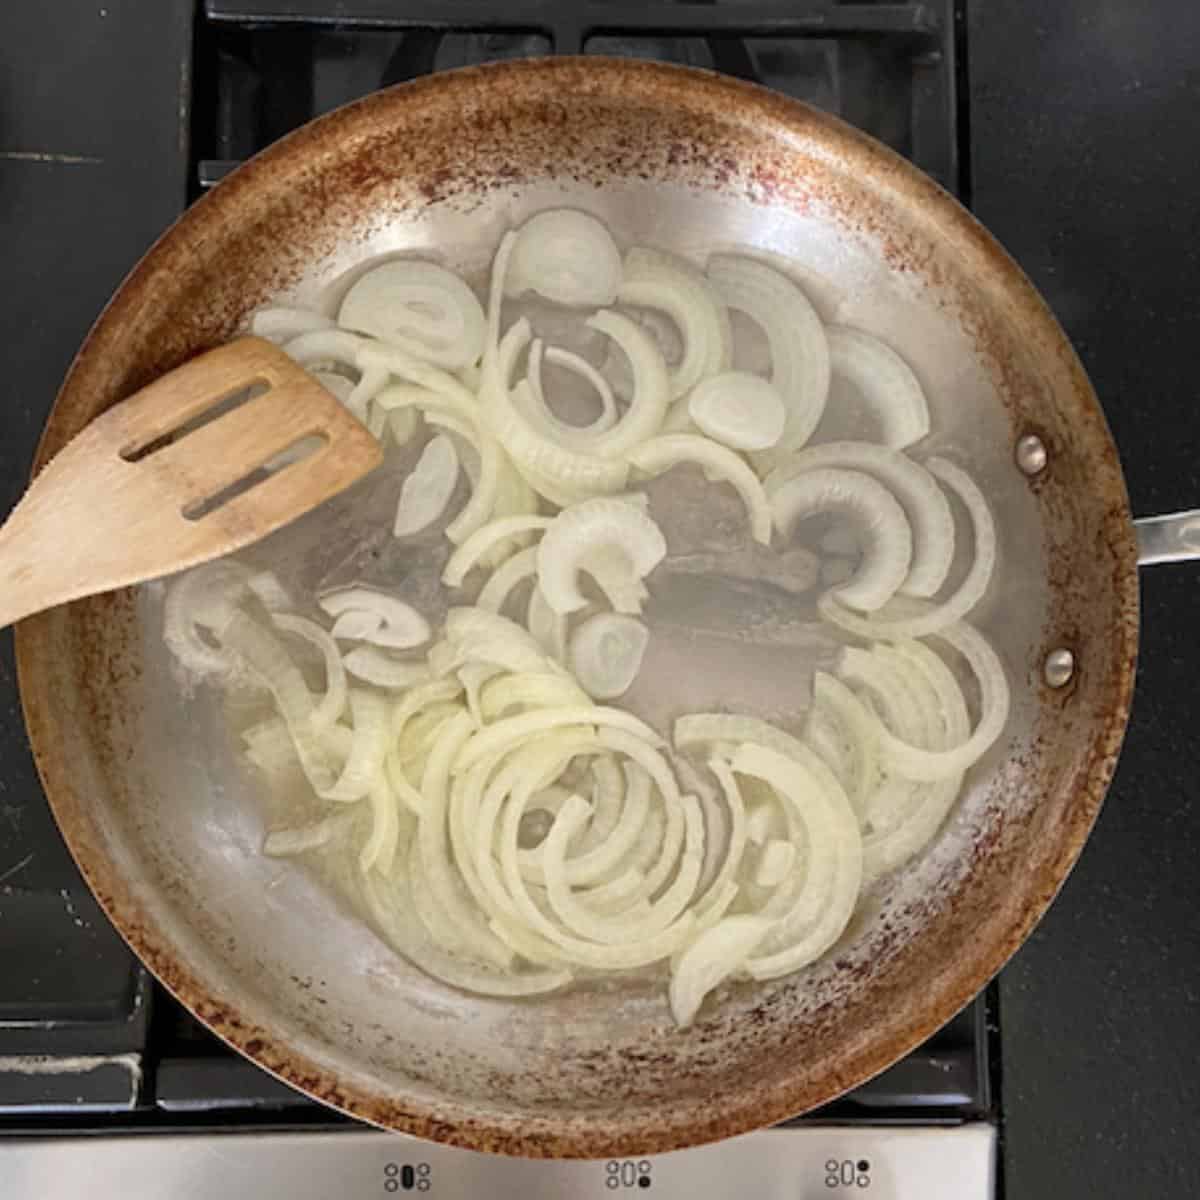 Caramelizing onions tossed into butter in pan with wooden spoon.